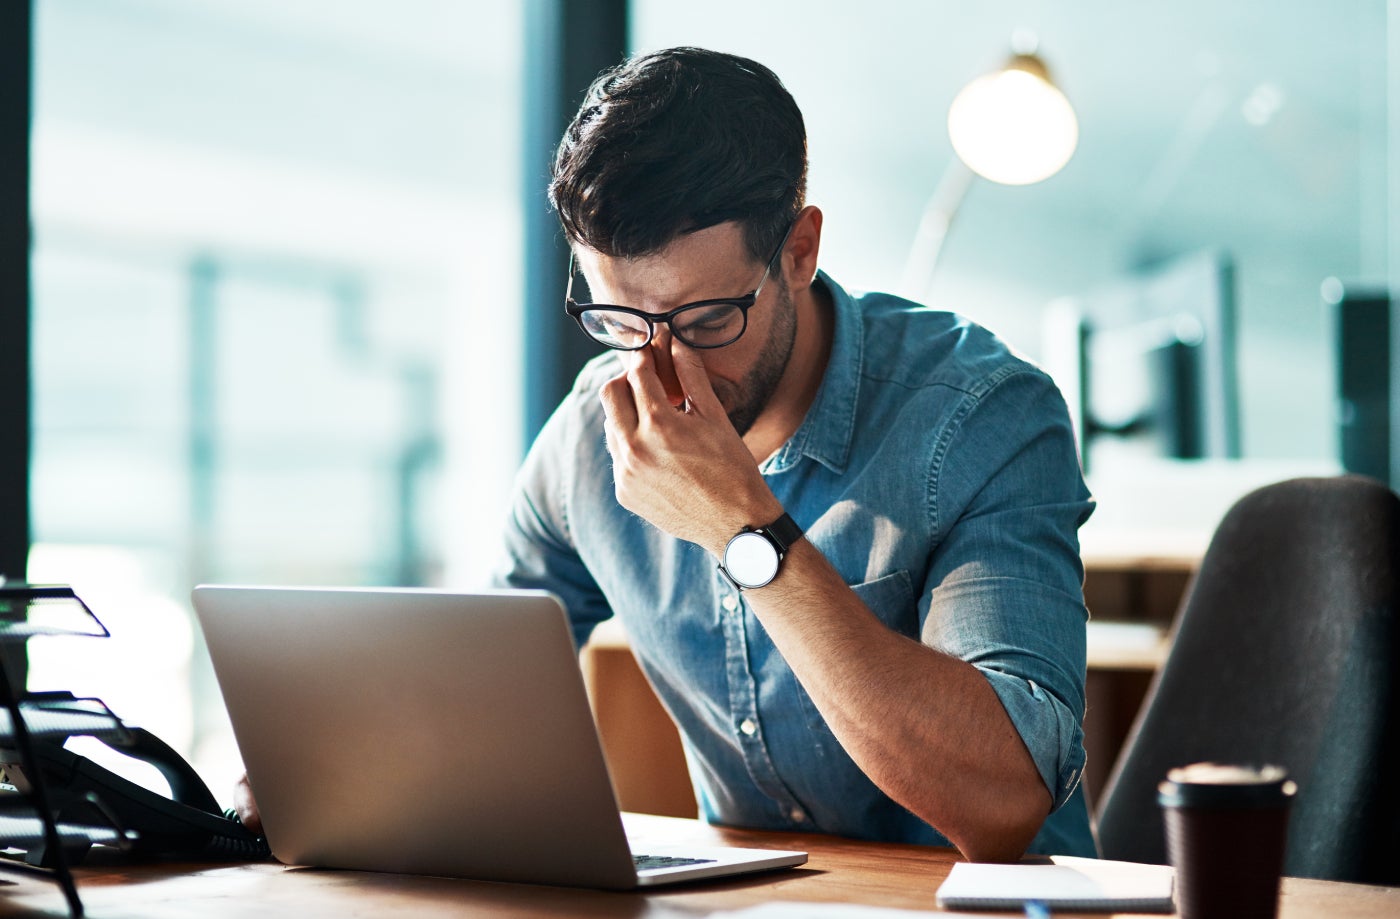 9 out of 10 UK Business Leaders Suffer From Tech Anxiety That Disrupts Their Sleep, BT Study Finds